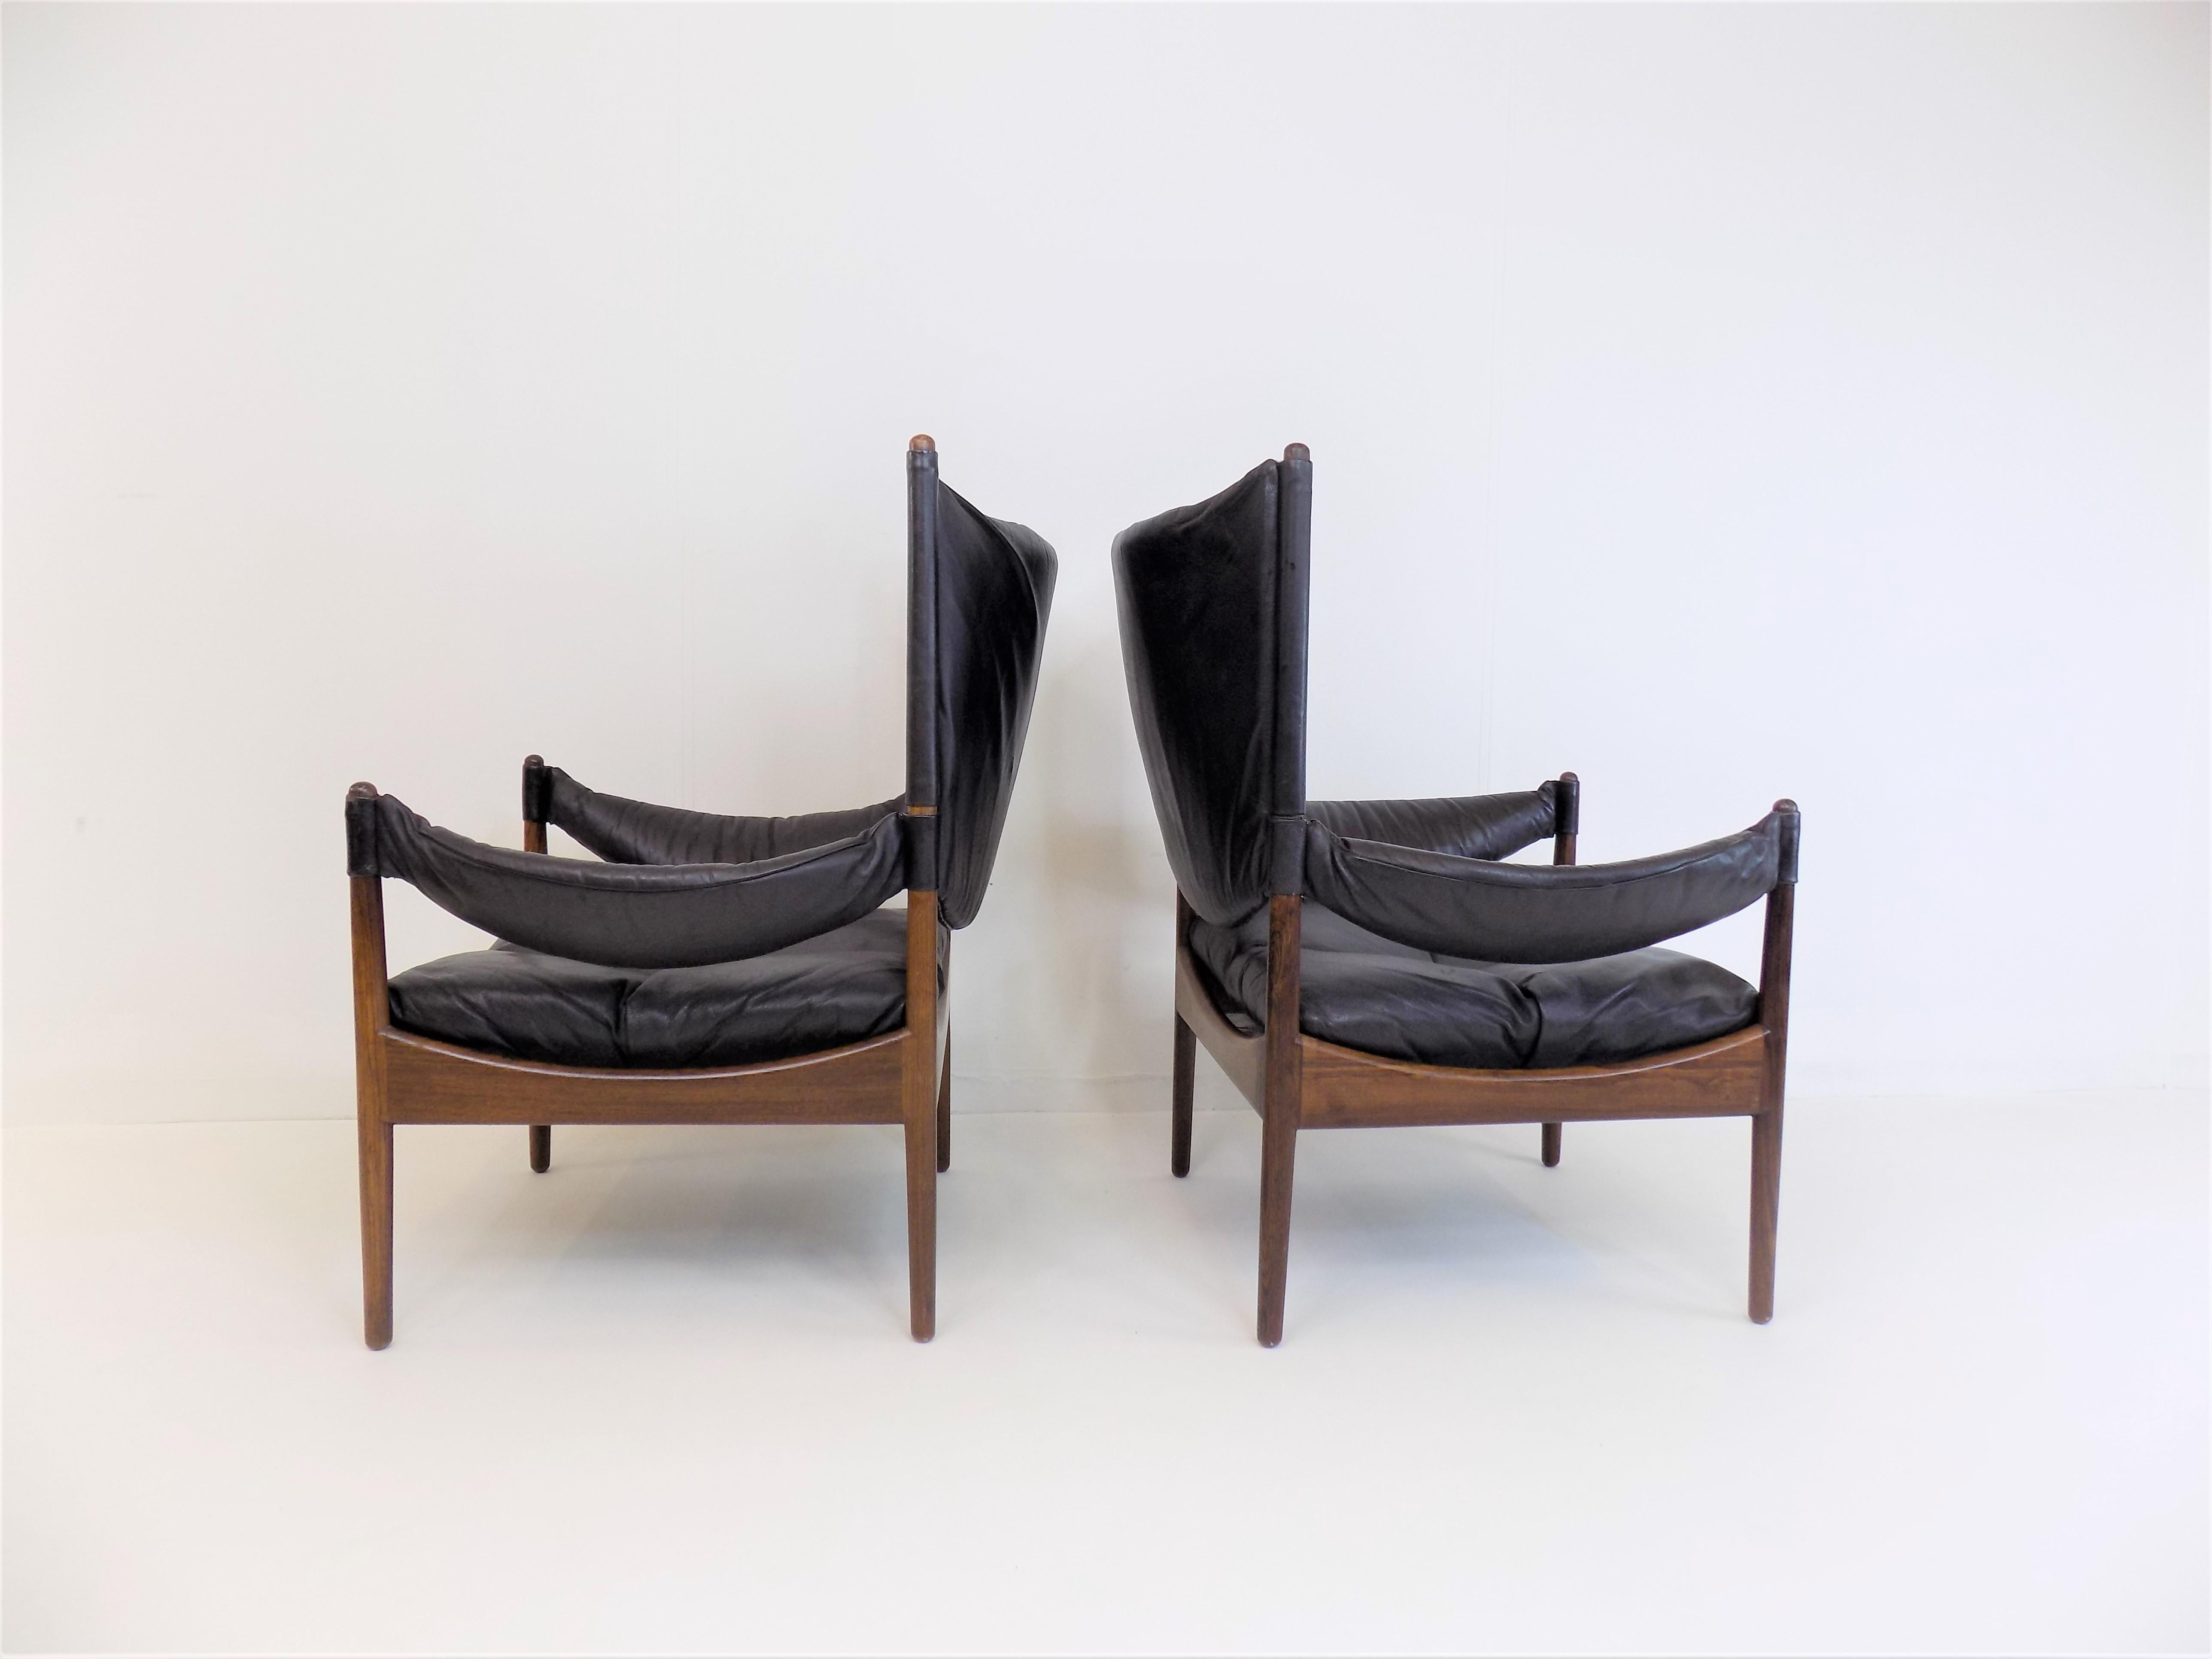 Excellent condition pair of modus armchairs by Kristian Vedel with rosewood frame. The leather of both chairs is in excellent condition, soft with no tears or wear. The rosewood frames have a beautiful grain and show hardly any signs of wear. The